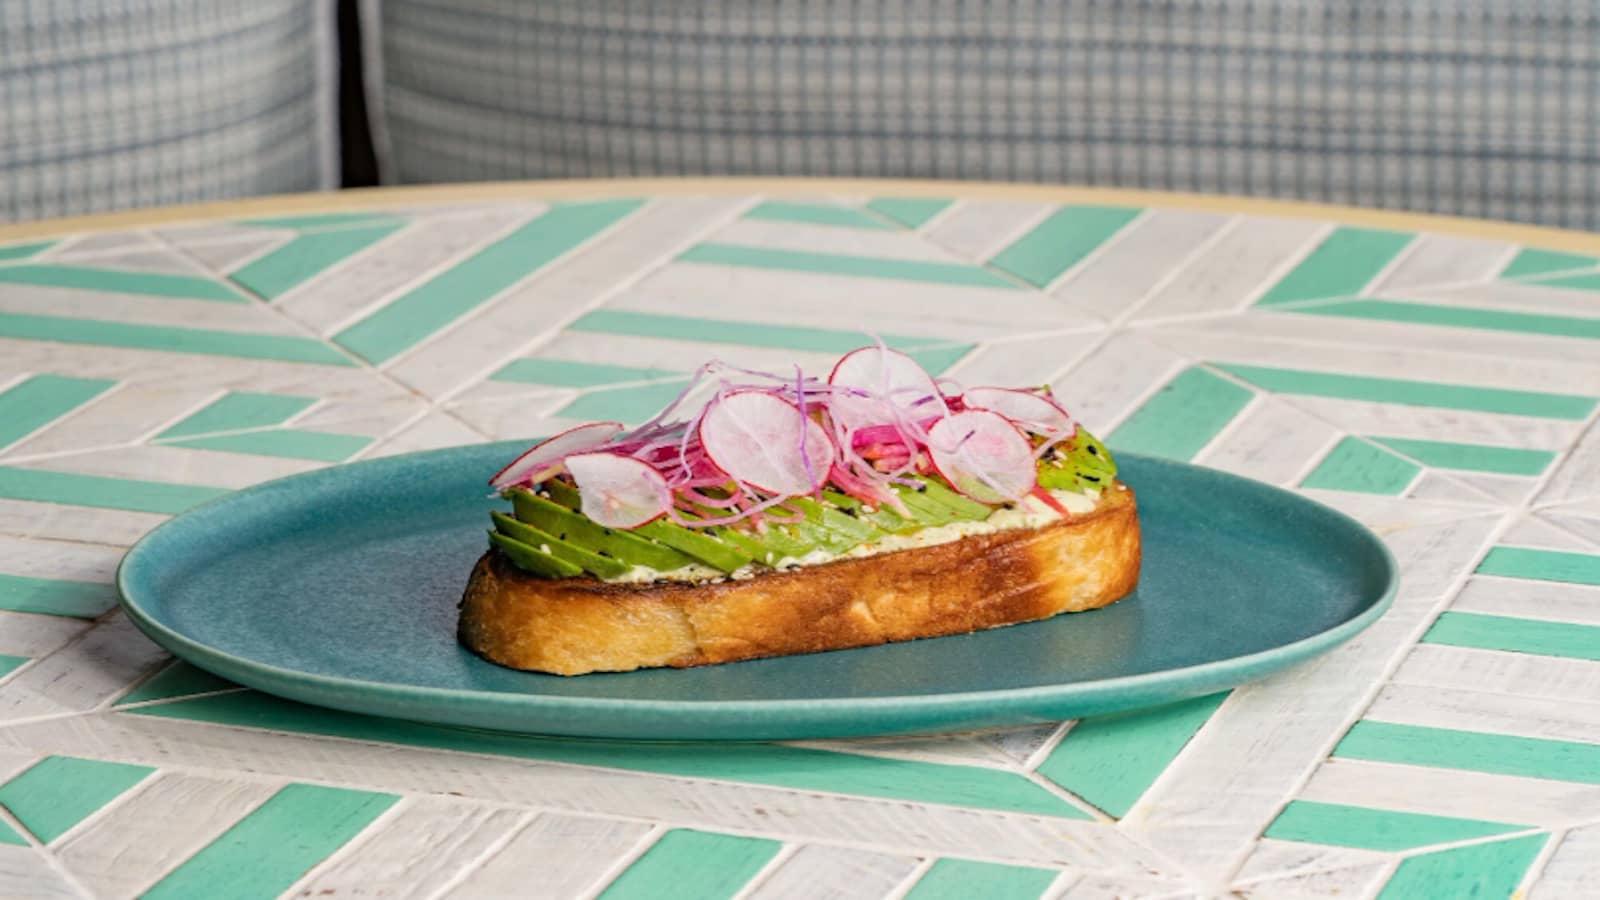 bungalow kitchen_avocado toast_mothers day brunch_800x450